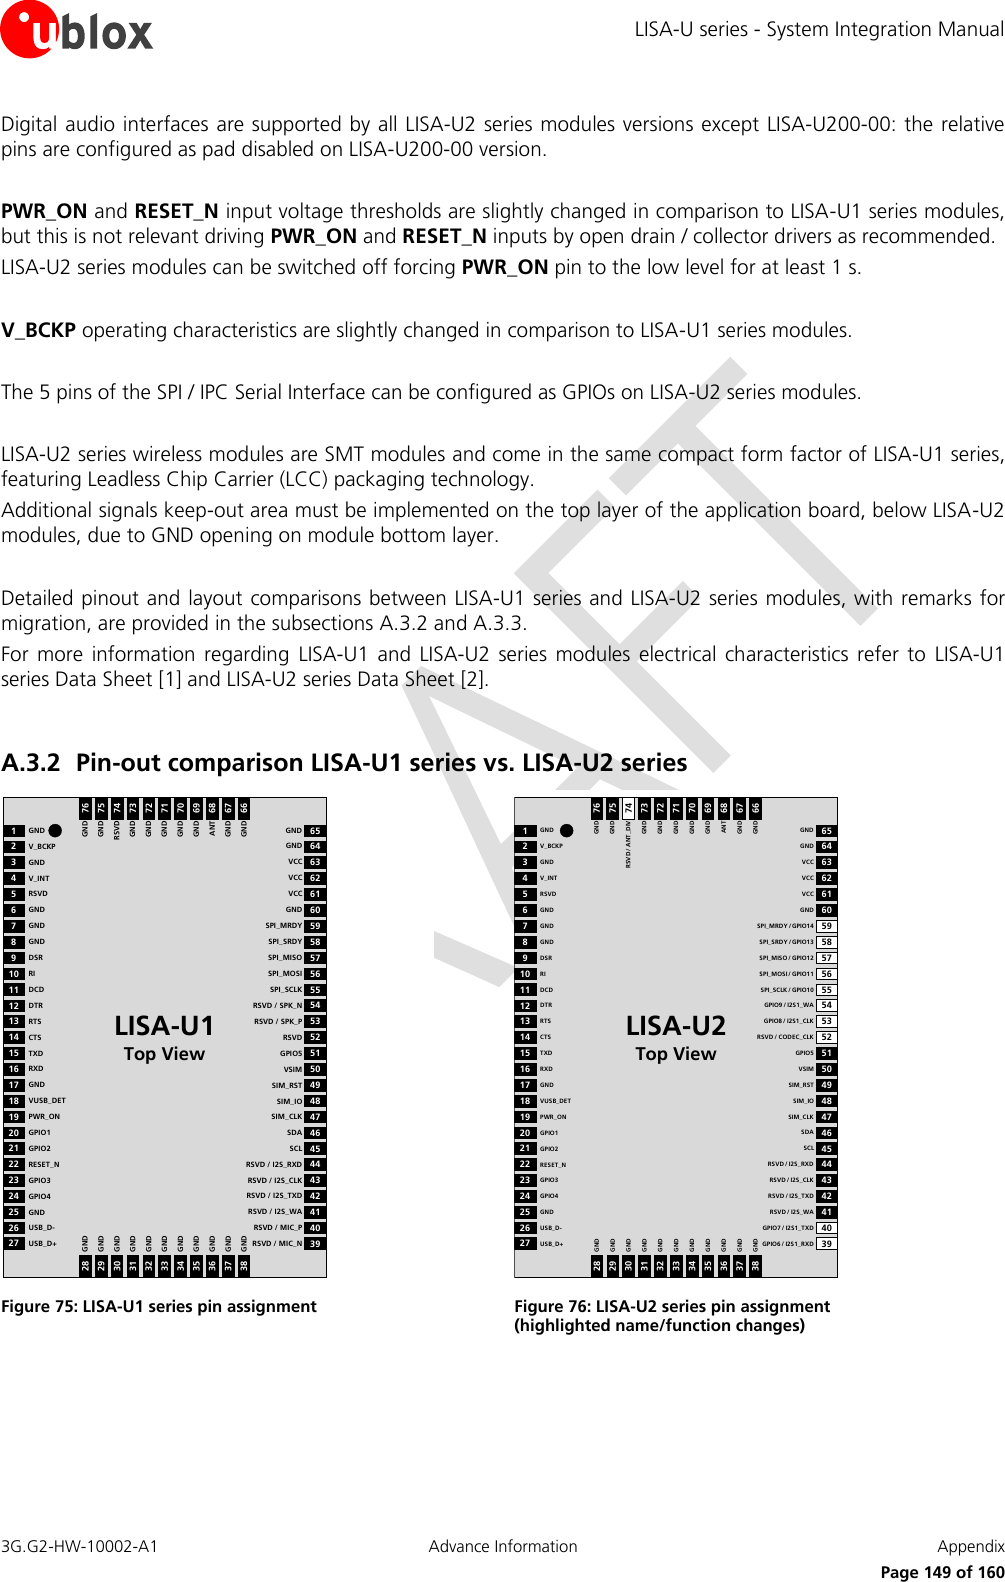 LISA-U series - System Integration Manual 3G.G2-HW-10002-A1  Advance Information  Appendix      Page 149 of 160 Digital audio interfaces are supported by all LISA-U2 series modules versions except LISA-U200-00: the relative pins are configured as pad disabled on LISA-U200-00 version.  PWR_ON and RESET_N input voltage thresholds are slightly changed in comparison to LISA-U1 series modules, but this is not relevant driving PWR_ON and RESET_N inputs by open drain / collector drivers as recommended. LISA-U2 series modules can be switched off forcing PWR_ON pin to the low level for at least 1 s.  V_BCKP operating characteristics are slightly changed in comparison to LISA-U1 series modules.  The 5 pins of the SPI / IPC Serial Interface can be configured as GPIOs on LISA-U2 series modules.  LISA-U2 series wireless modules are SMT modules and come in the same compact form factor of LISA-U1 series, featuring Leadless Chip Carrier (LCC) packaging technology. Additional signals keep-out area must be implemented on the top layer of the application board, below LISA-U2 modules, due to GND opening on module bottom layer.  Detailed pinout and layout comparisons between LISA-U1 series and LISA-U2 series modules, with remarks  for migration, are provided in the subsections A.3.2 and A.3.3. For  more information  regarding  LISA-U1  and  LISA-U2 series  modules  electrical  characteristics  refer  to  LISA-U1 series Data Sheet [1] and LISA-U2 series Data Sheet [2].  A.3.2 Pin-out comparison LISA-U1 series vs. LISA-U2 series 65646362616059585756555453525150494847464544434241GNDVCCVCCVCCGNDSPI_MRDYSPI_SRDYSPI_MISOSPI_MOSISPI_SCLKRSVD / SPK_NGNDRSVD / SPK_PRSVDGPIO5VSIMSIM_RSTSIM_IOSIM_CLKSDASCLRSVD / I2S_RXDRSVD / I2S_CLKRSVD / I2S_TXDRSVD / I2S_WA12345678910111213141516171819202122232425V_BCKPGNDV_INTRSVDGNDGNDGNDDSRRIDCDDTRGNDRTSCTSTXDRXDGNDVUSB_DETPWR_ONGPIO1GPIO2RESET_NGPIO3GPIO4GND2627USB_D-USB_D+4039RSVD / MIC_PRSVD / MIC_N2829303132333435363738GNDGNDGNDGNDGNDGNDGNDGNDGNDGNDGND 7675747372717069686766GNDRSVDGNDGNDGNDGNDGNDANTGNDGNDGNDLISA-U1Top View Figure 75: LISA-U1 series pin assignment 65646362616059585756555453525150494847464544434241GNDVCCVCCVCCGNDSPI_MRDY / GPIO14SPI_SRDY / GPIO13SPI_MISO / GPIO12SPI_MOSI / GPIO11SPI_SCLK / GPIO10GPIO9 / I2S1_WAGNDGPIO8 / I2S1_CLKRSVD / CODEC_CLKGPIO5VSIMSIM_RSTSIM_IOSIM_CLKSDASCLRSVD / I2S_RXDRSVD / I2S_CLKRSVD / I2S_TXDRSVD / I2S_WA12345678910111213141516171819202122232425V_BCKPGNDV_INTRSVDGNDGNDGNDDSRRIDCDDTRGNDRTSCTSTXDRXDGNDVUSB_DETPWR_ONGPIO1GPIO2RESET_NGPIO3GPIO4GND2627USB_D-USB_D+4039GPIO7 / I2S1_TXDGPIO6 / I2S1_RXD2829303132333435363738GNDGNDGNDGNDGNDGNDGNDGNDGNDGNDGND 7675747372717069686766GNDRSVD / ANT_DIVGNDGNDGNDGNDGNDANTGNDGNDGNDLISA-U2Top View Figure 76: LISA-U2 series pin assignment  (highlighted name/function changes)  